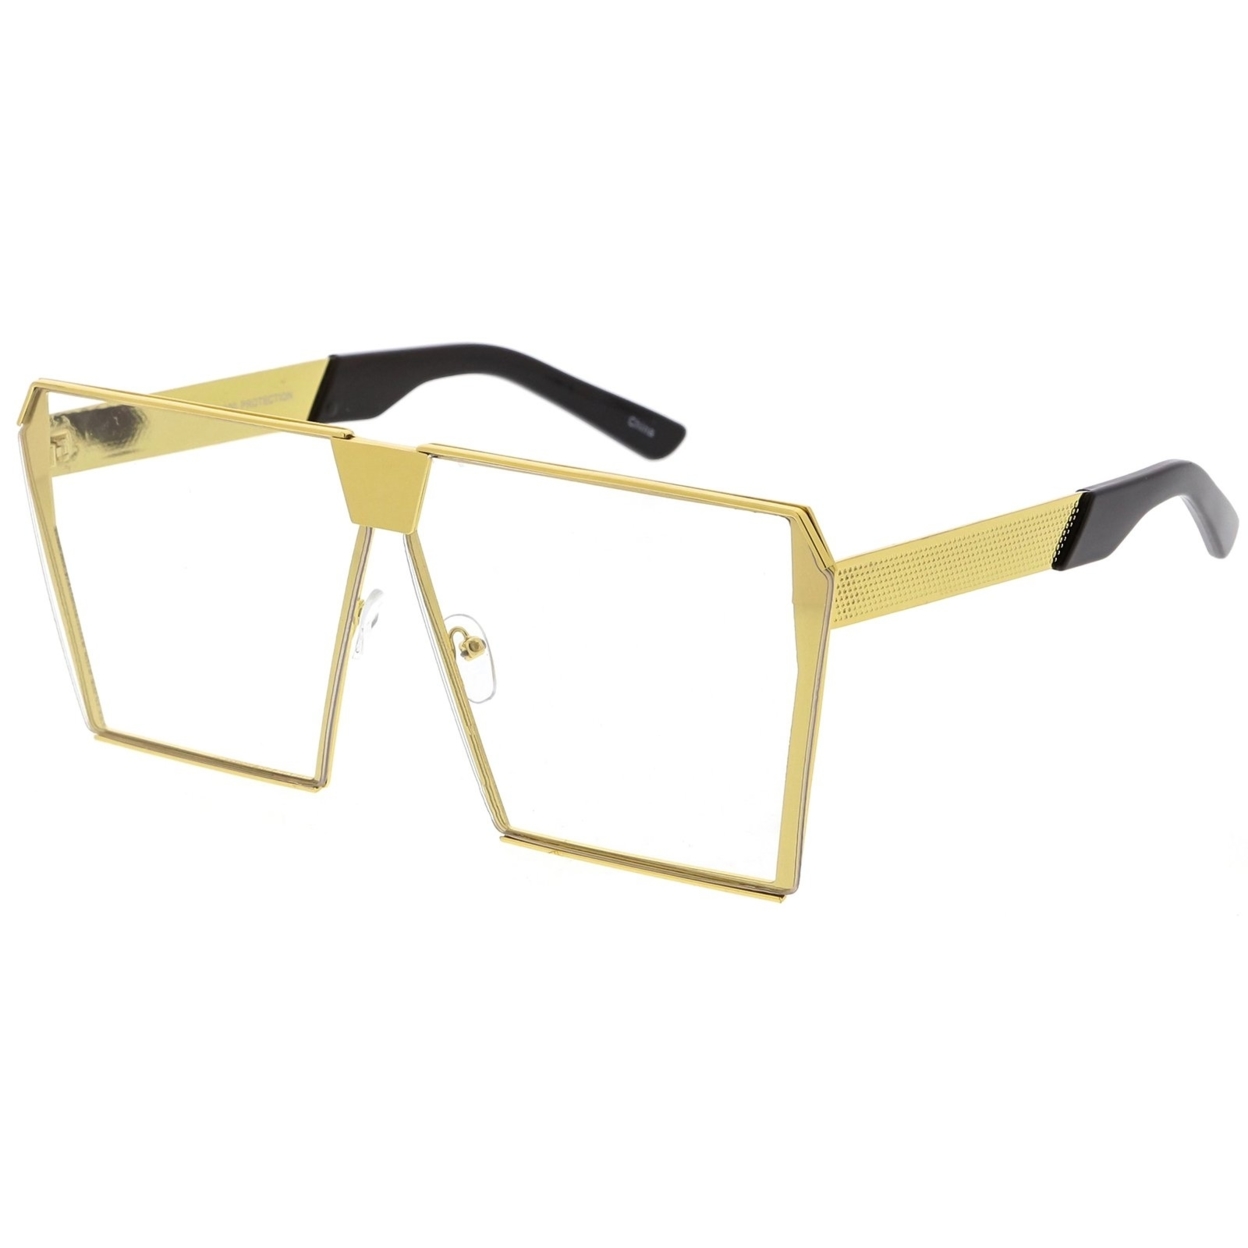 Modern Oversize Semi Rimless Square Eyeglasses With Clear Flat Lens 69mm - Gold / Clear